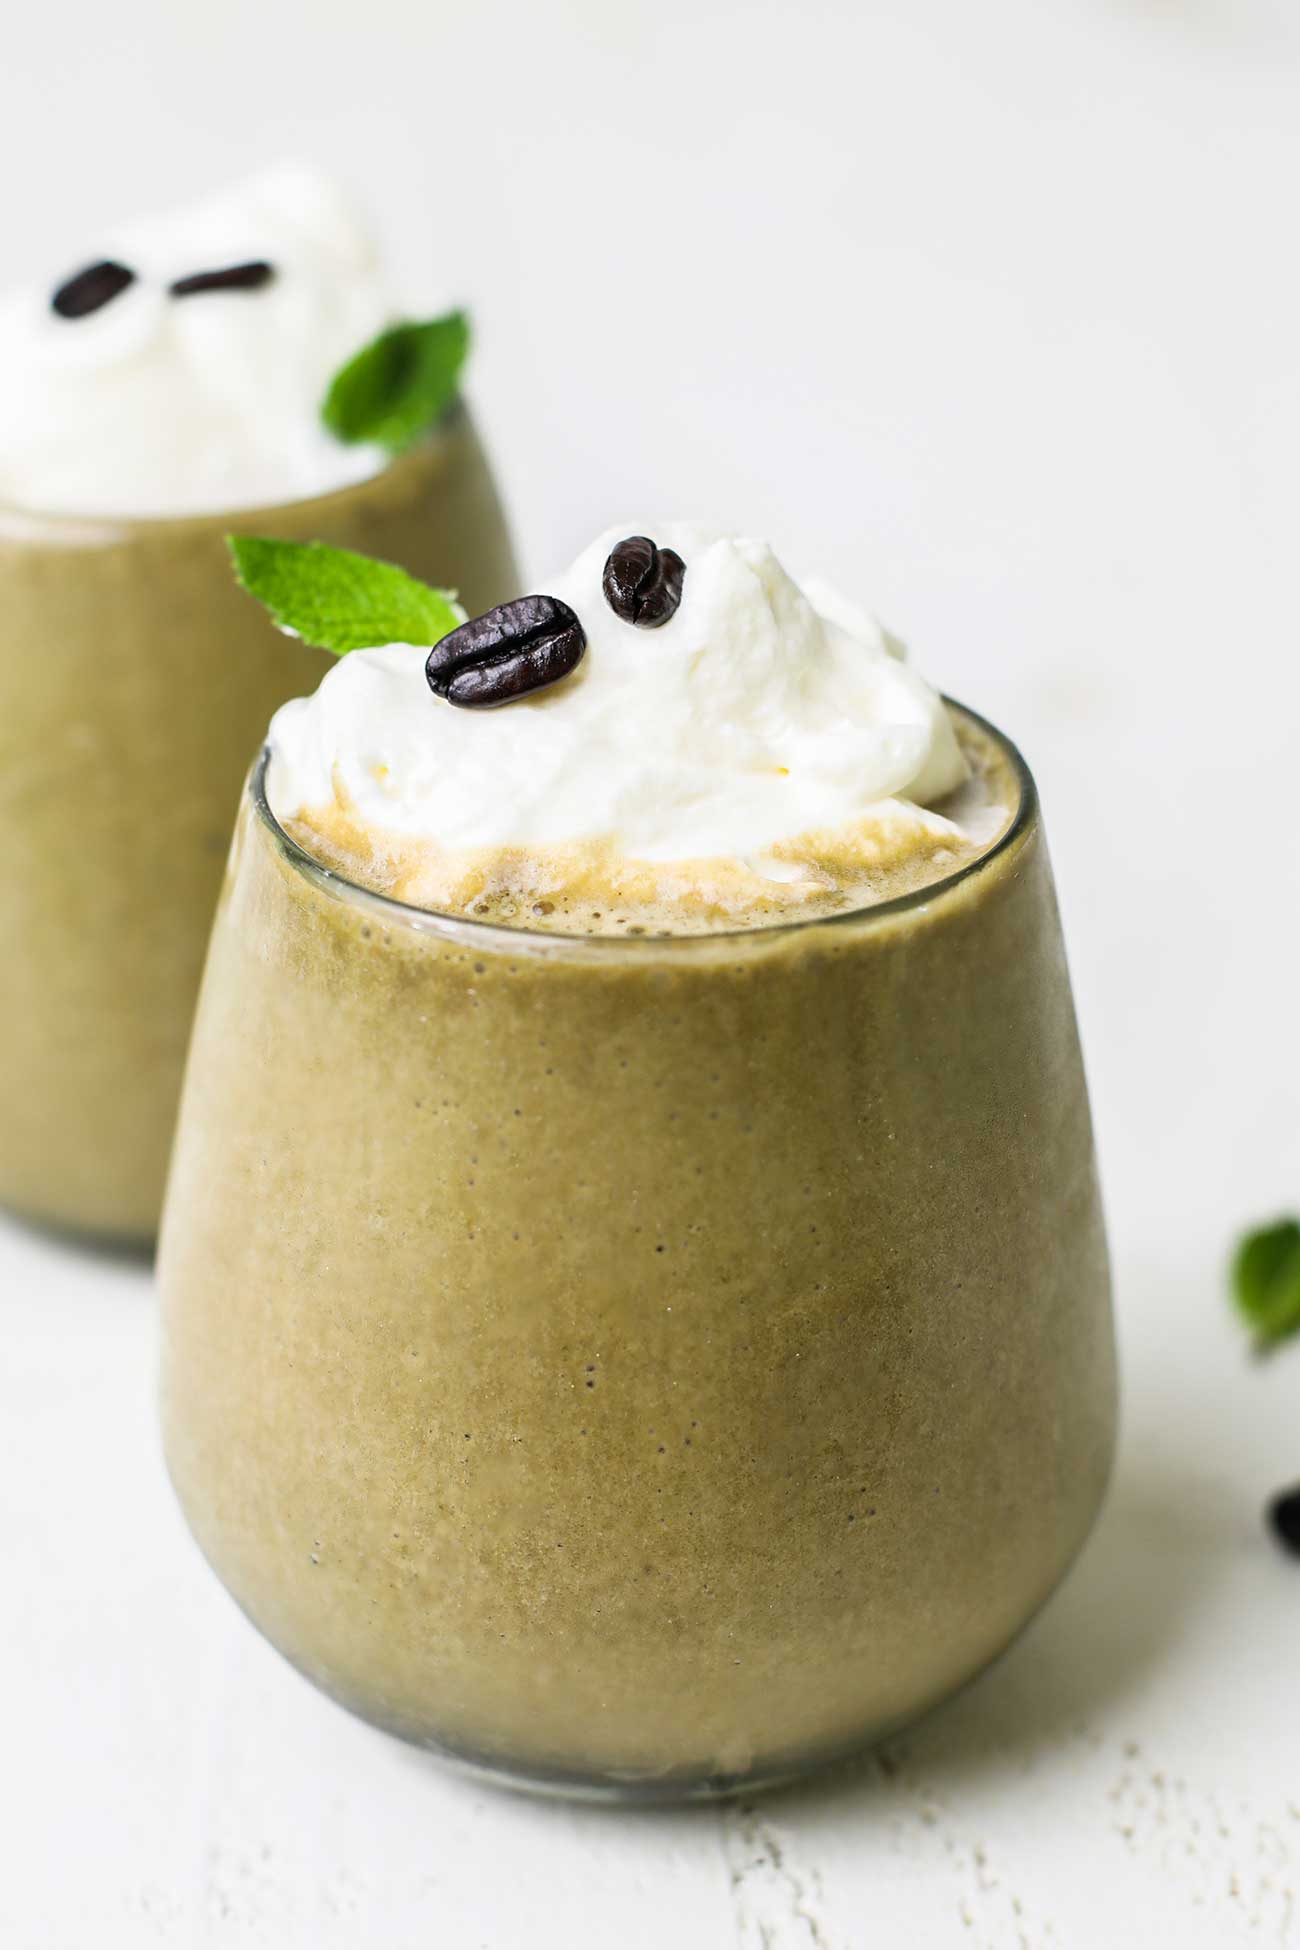 A thick and creamy Banana Coffee Smoothie shown garnished with whipped cream.